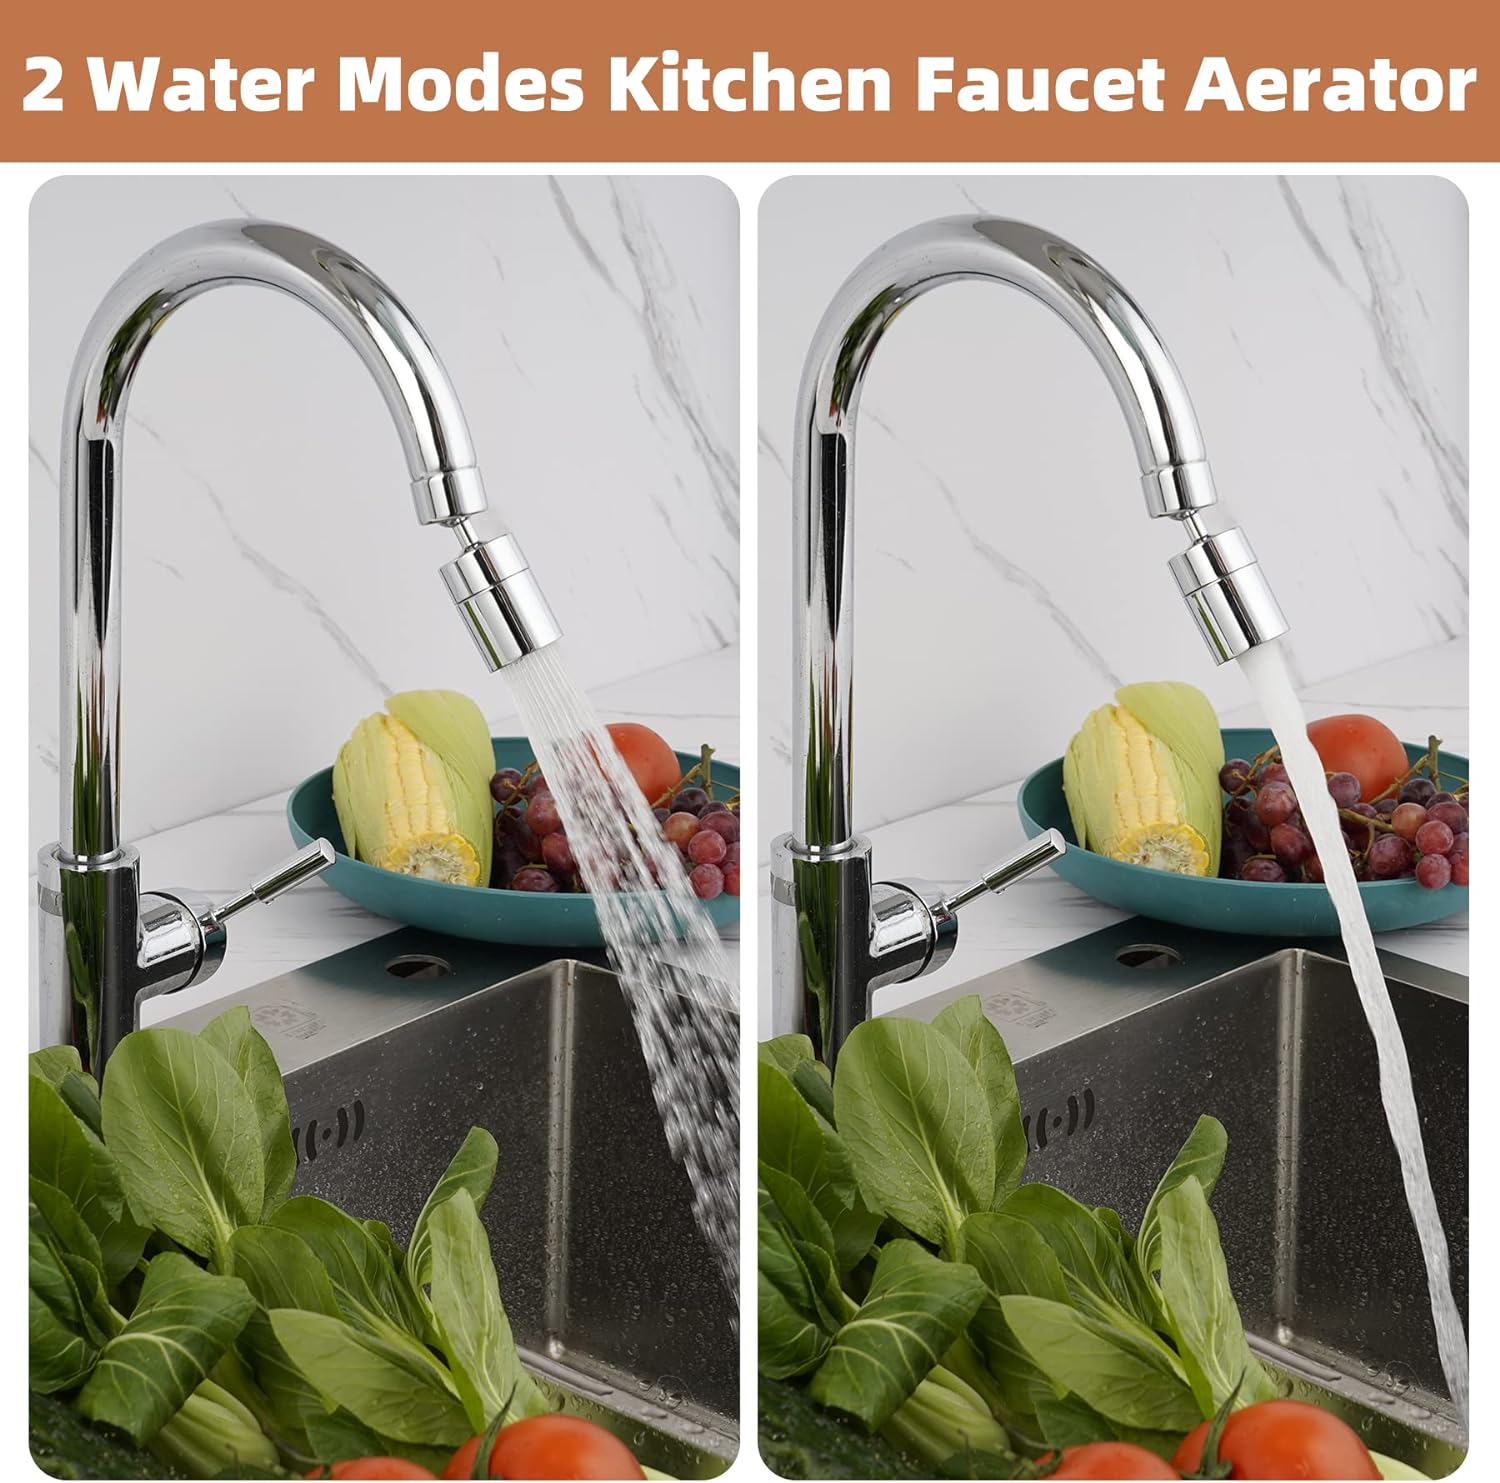 Hibbent Faucet Aerators Hibbent Faucet Aerator Dual-function Kitchen Female Sink Aerator Sprayer Head 1.8 GPM Extra Angle Rotate